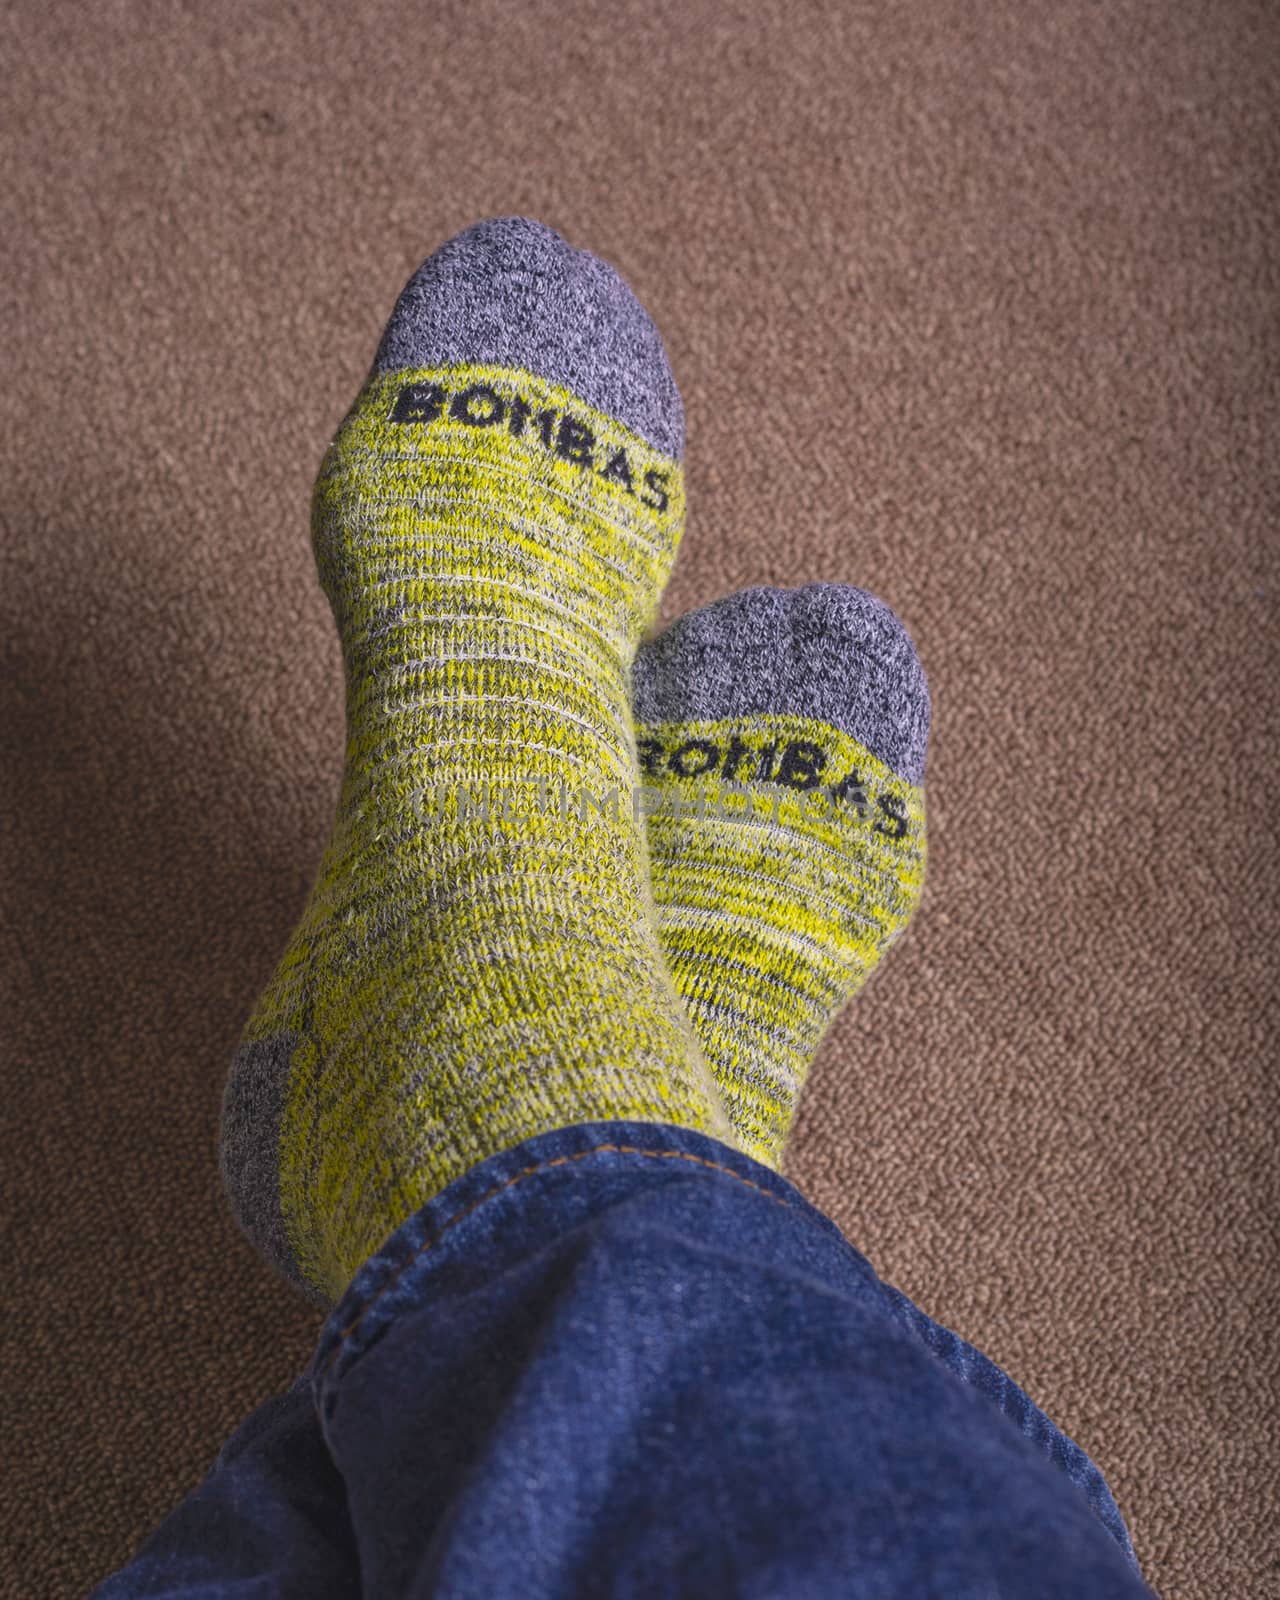 Yellow Bombas calf socks shown worn with blue jeans.